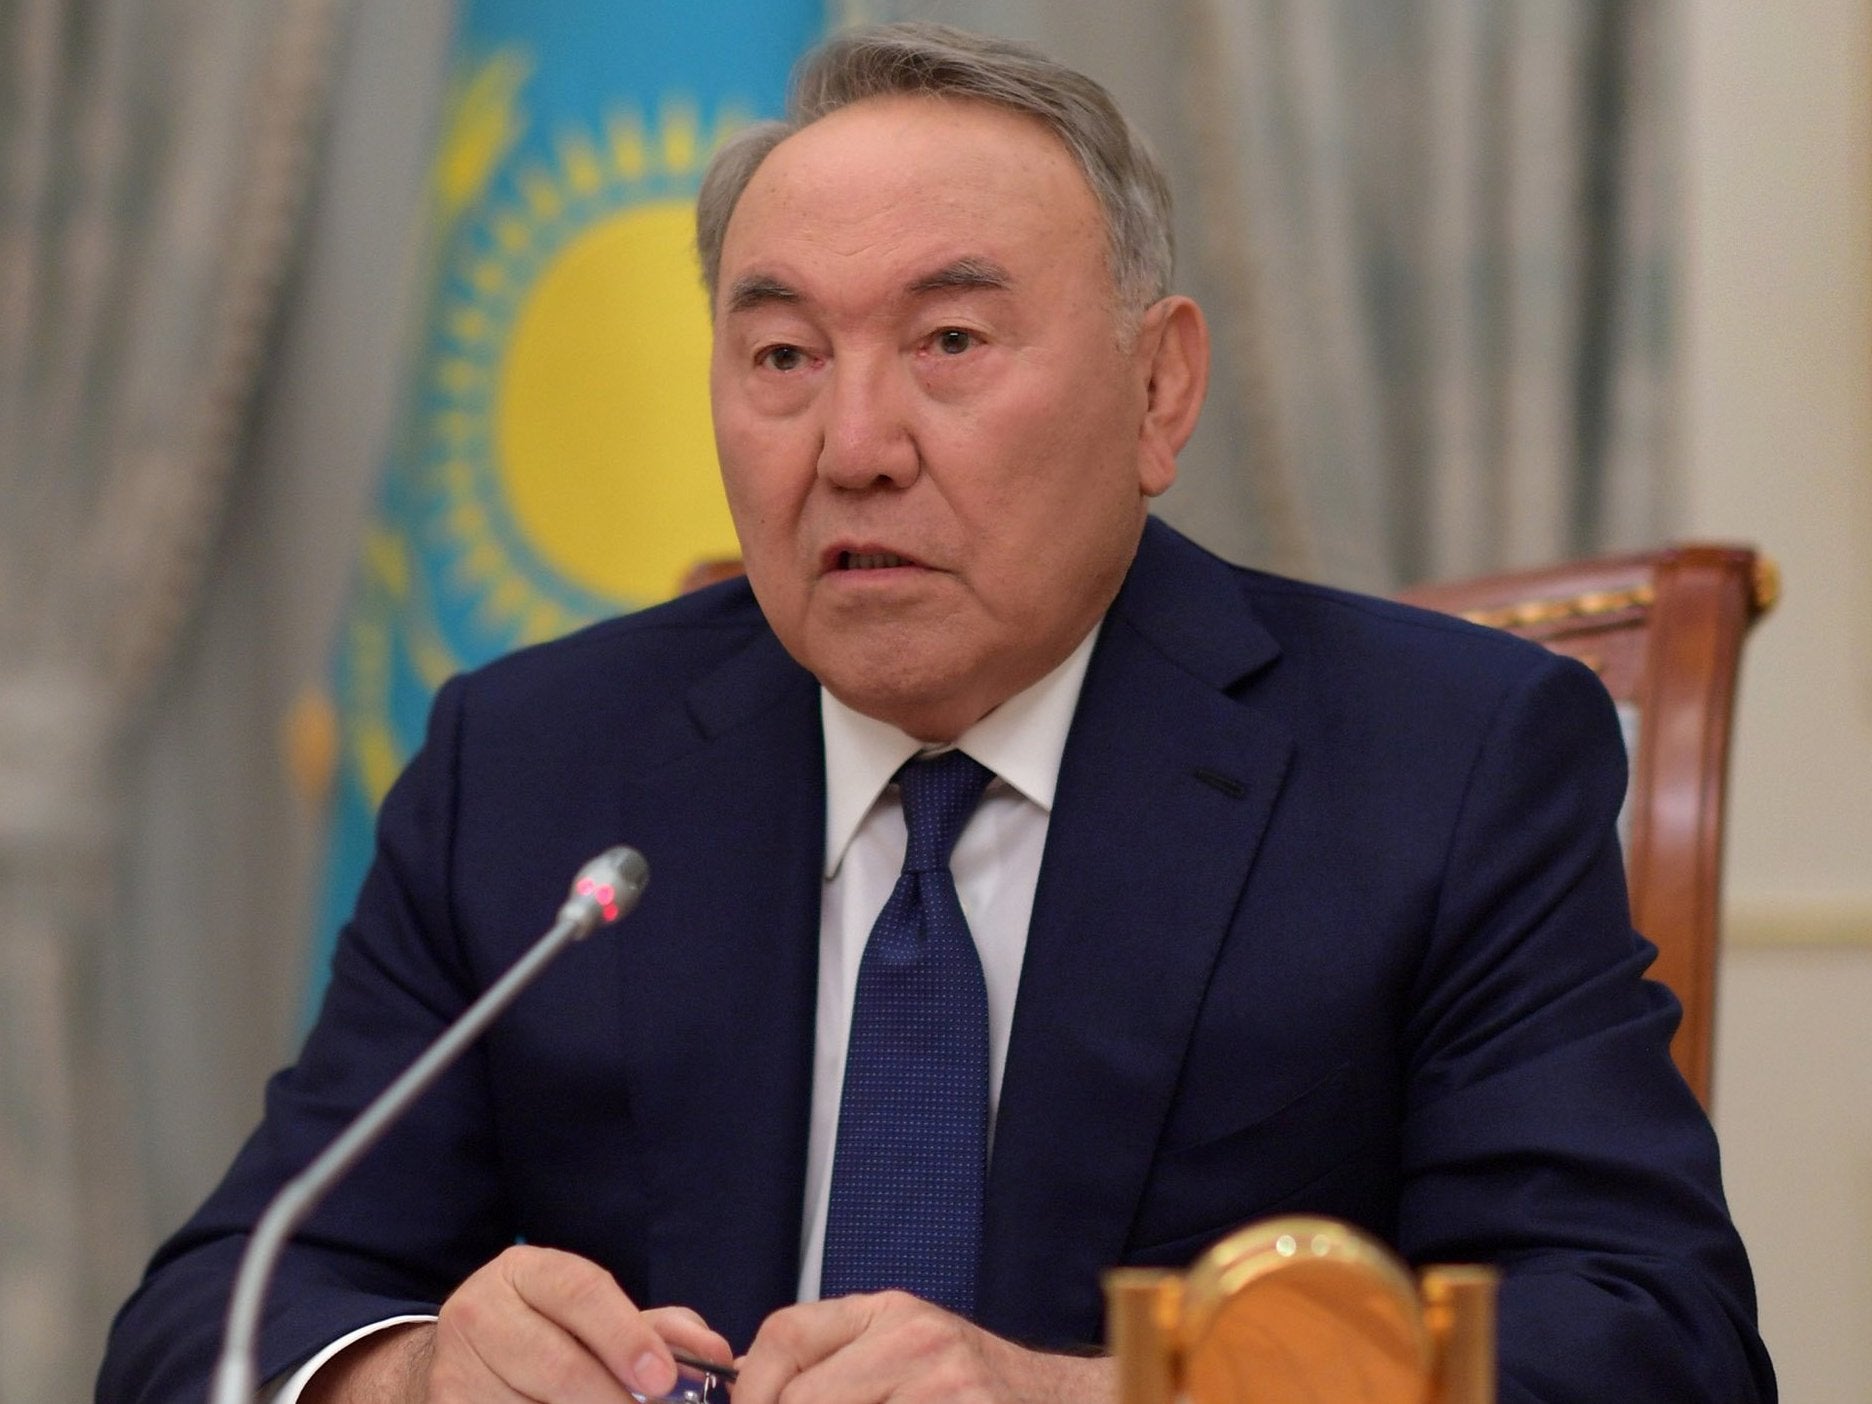 Kazakhstan president Nazarbayev resigns after almost three decades in power